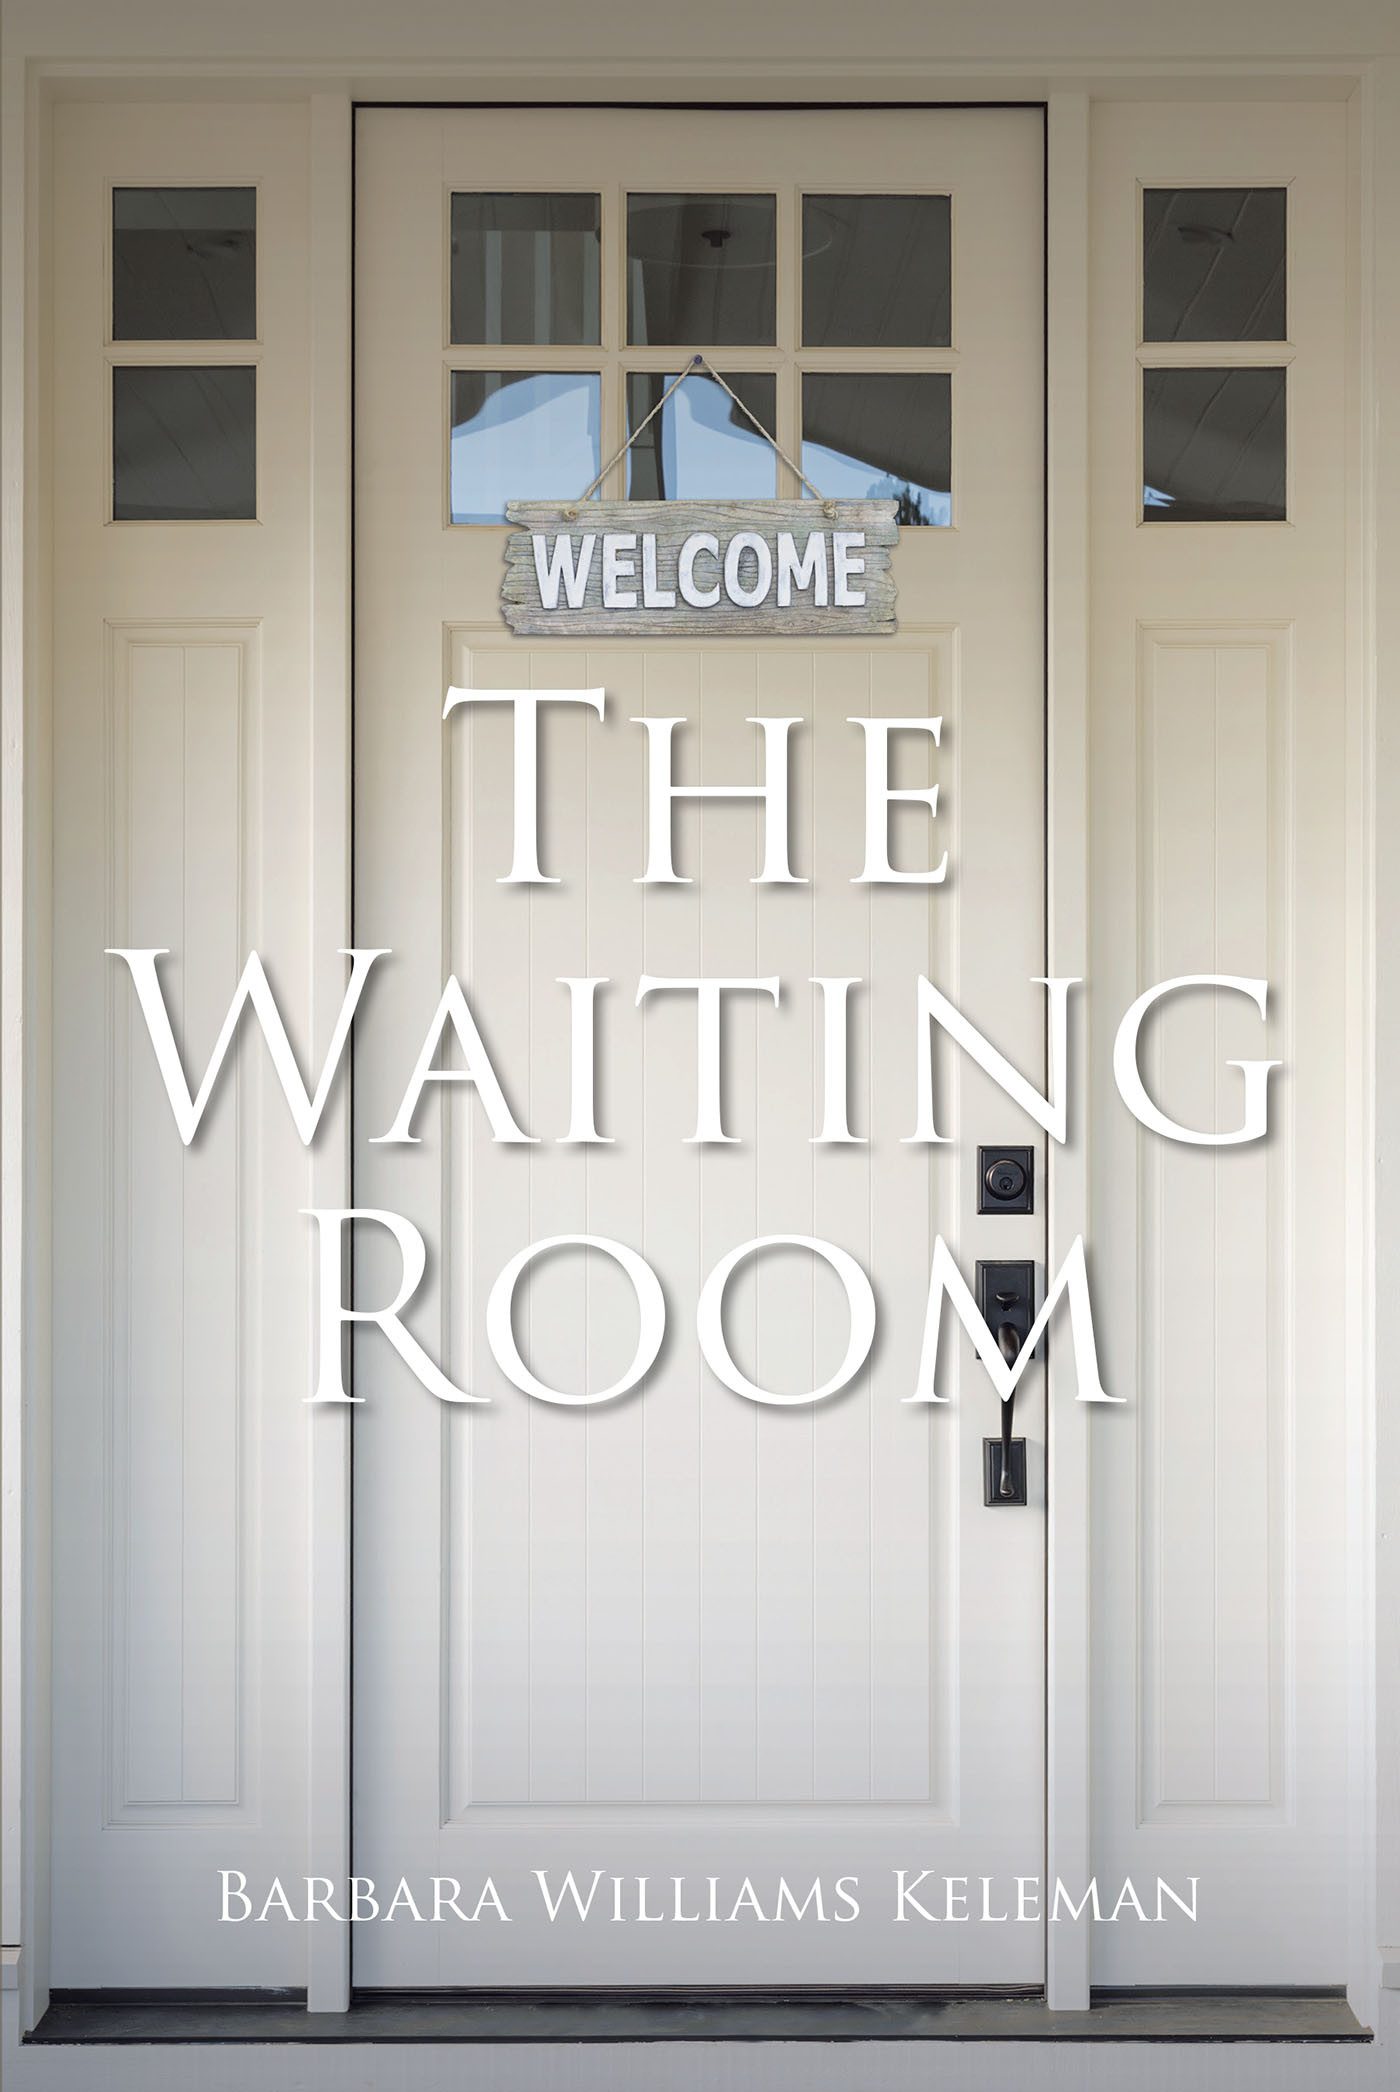 Barbara Williams Keleman’s Newly Released "The Waiting Room" is a Reflective and Enjoyable Look Back on a Life Lived in Determination and Faith